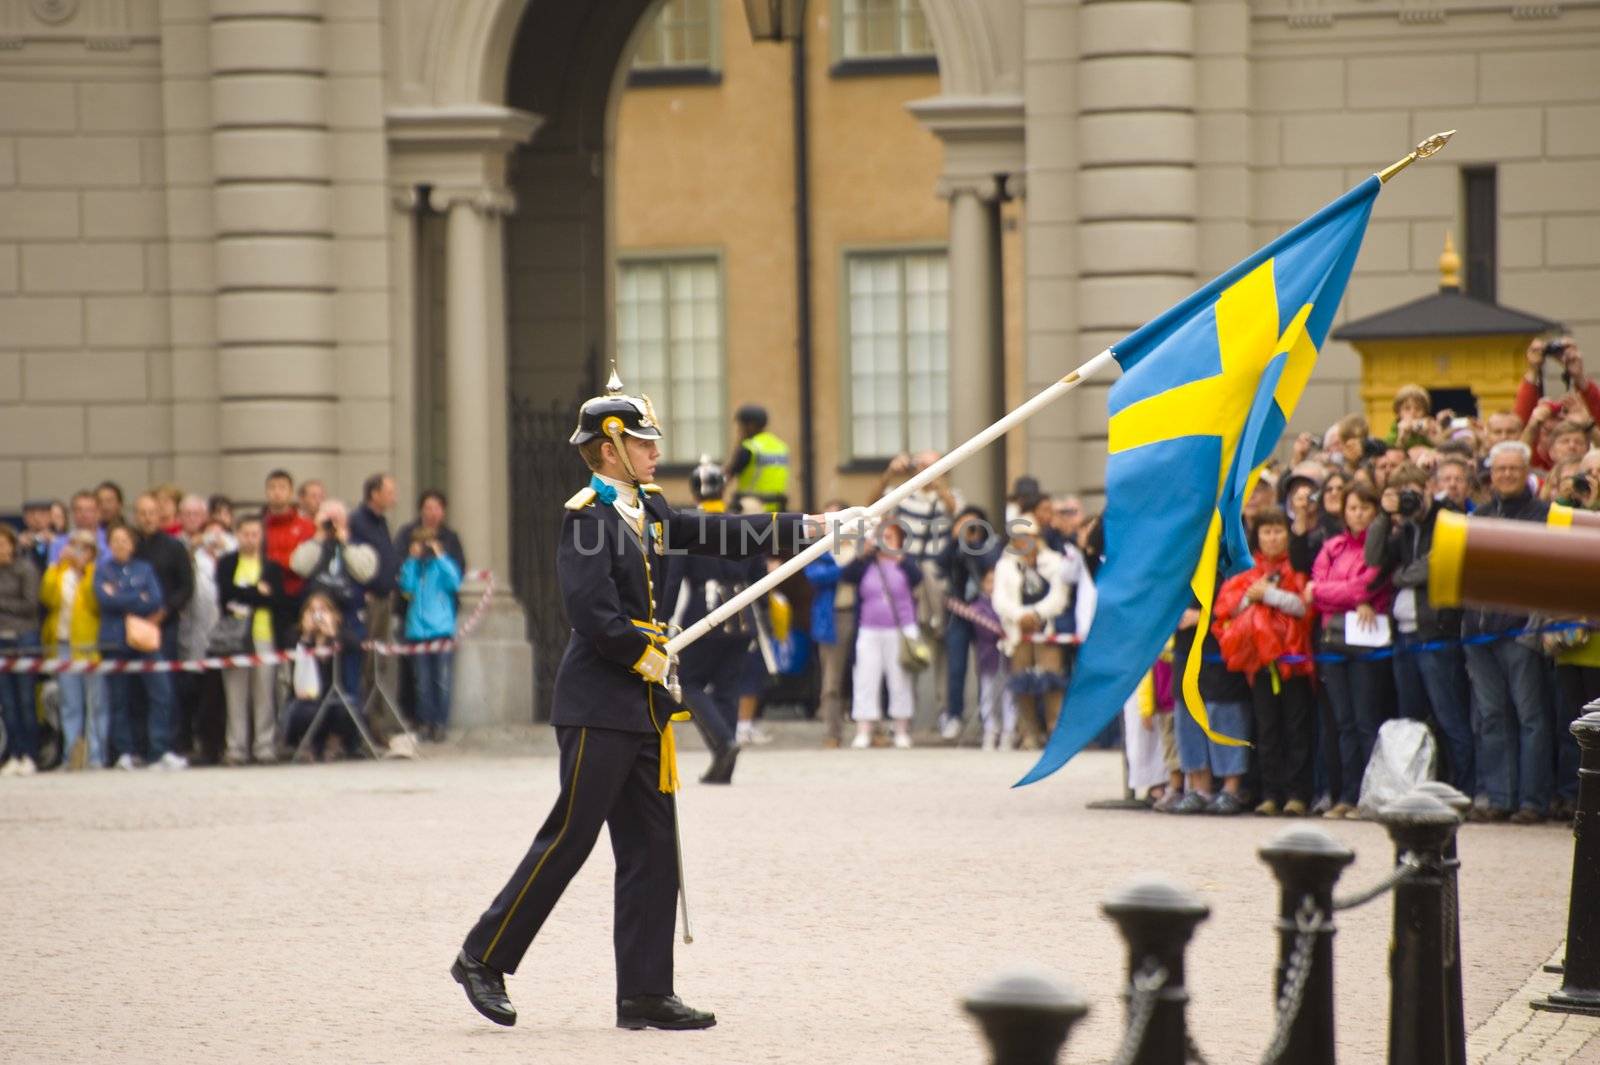 Relieved guard after the changing of the guards ceremony at the Royal Palace. The clear blue uniform is used solely by the soldiers of the Cavalry Battalion.